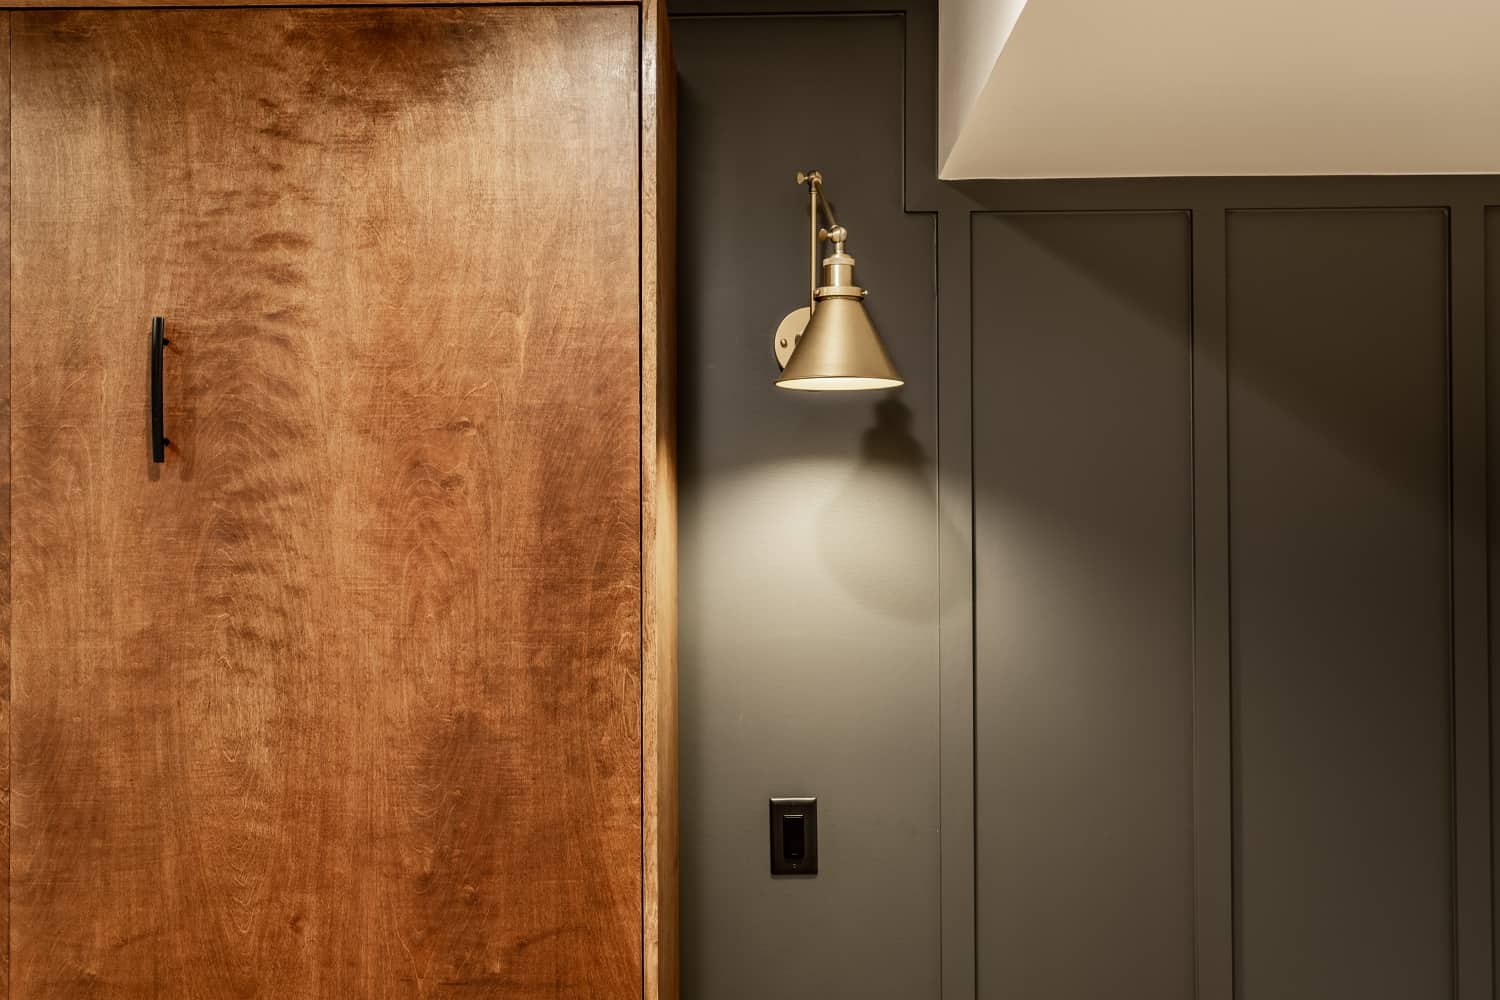 Nicholas Design Build | A remodel of a wooden door with a light on it in a dark room.